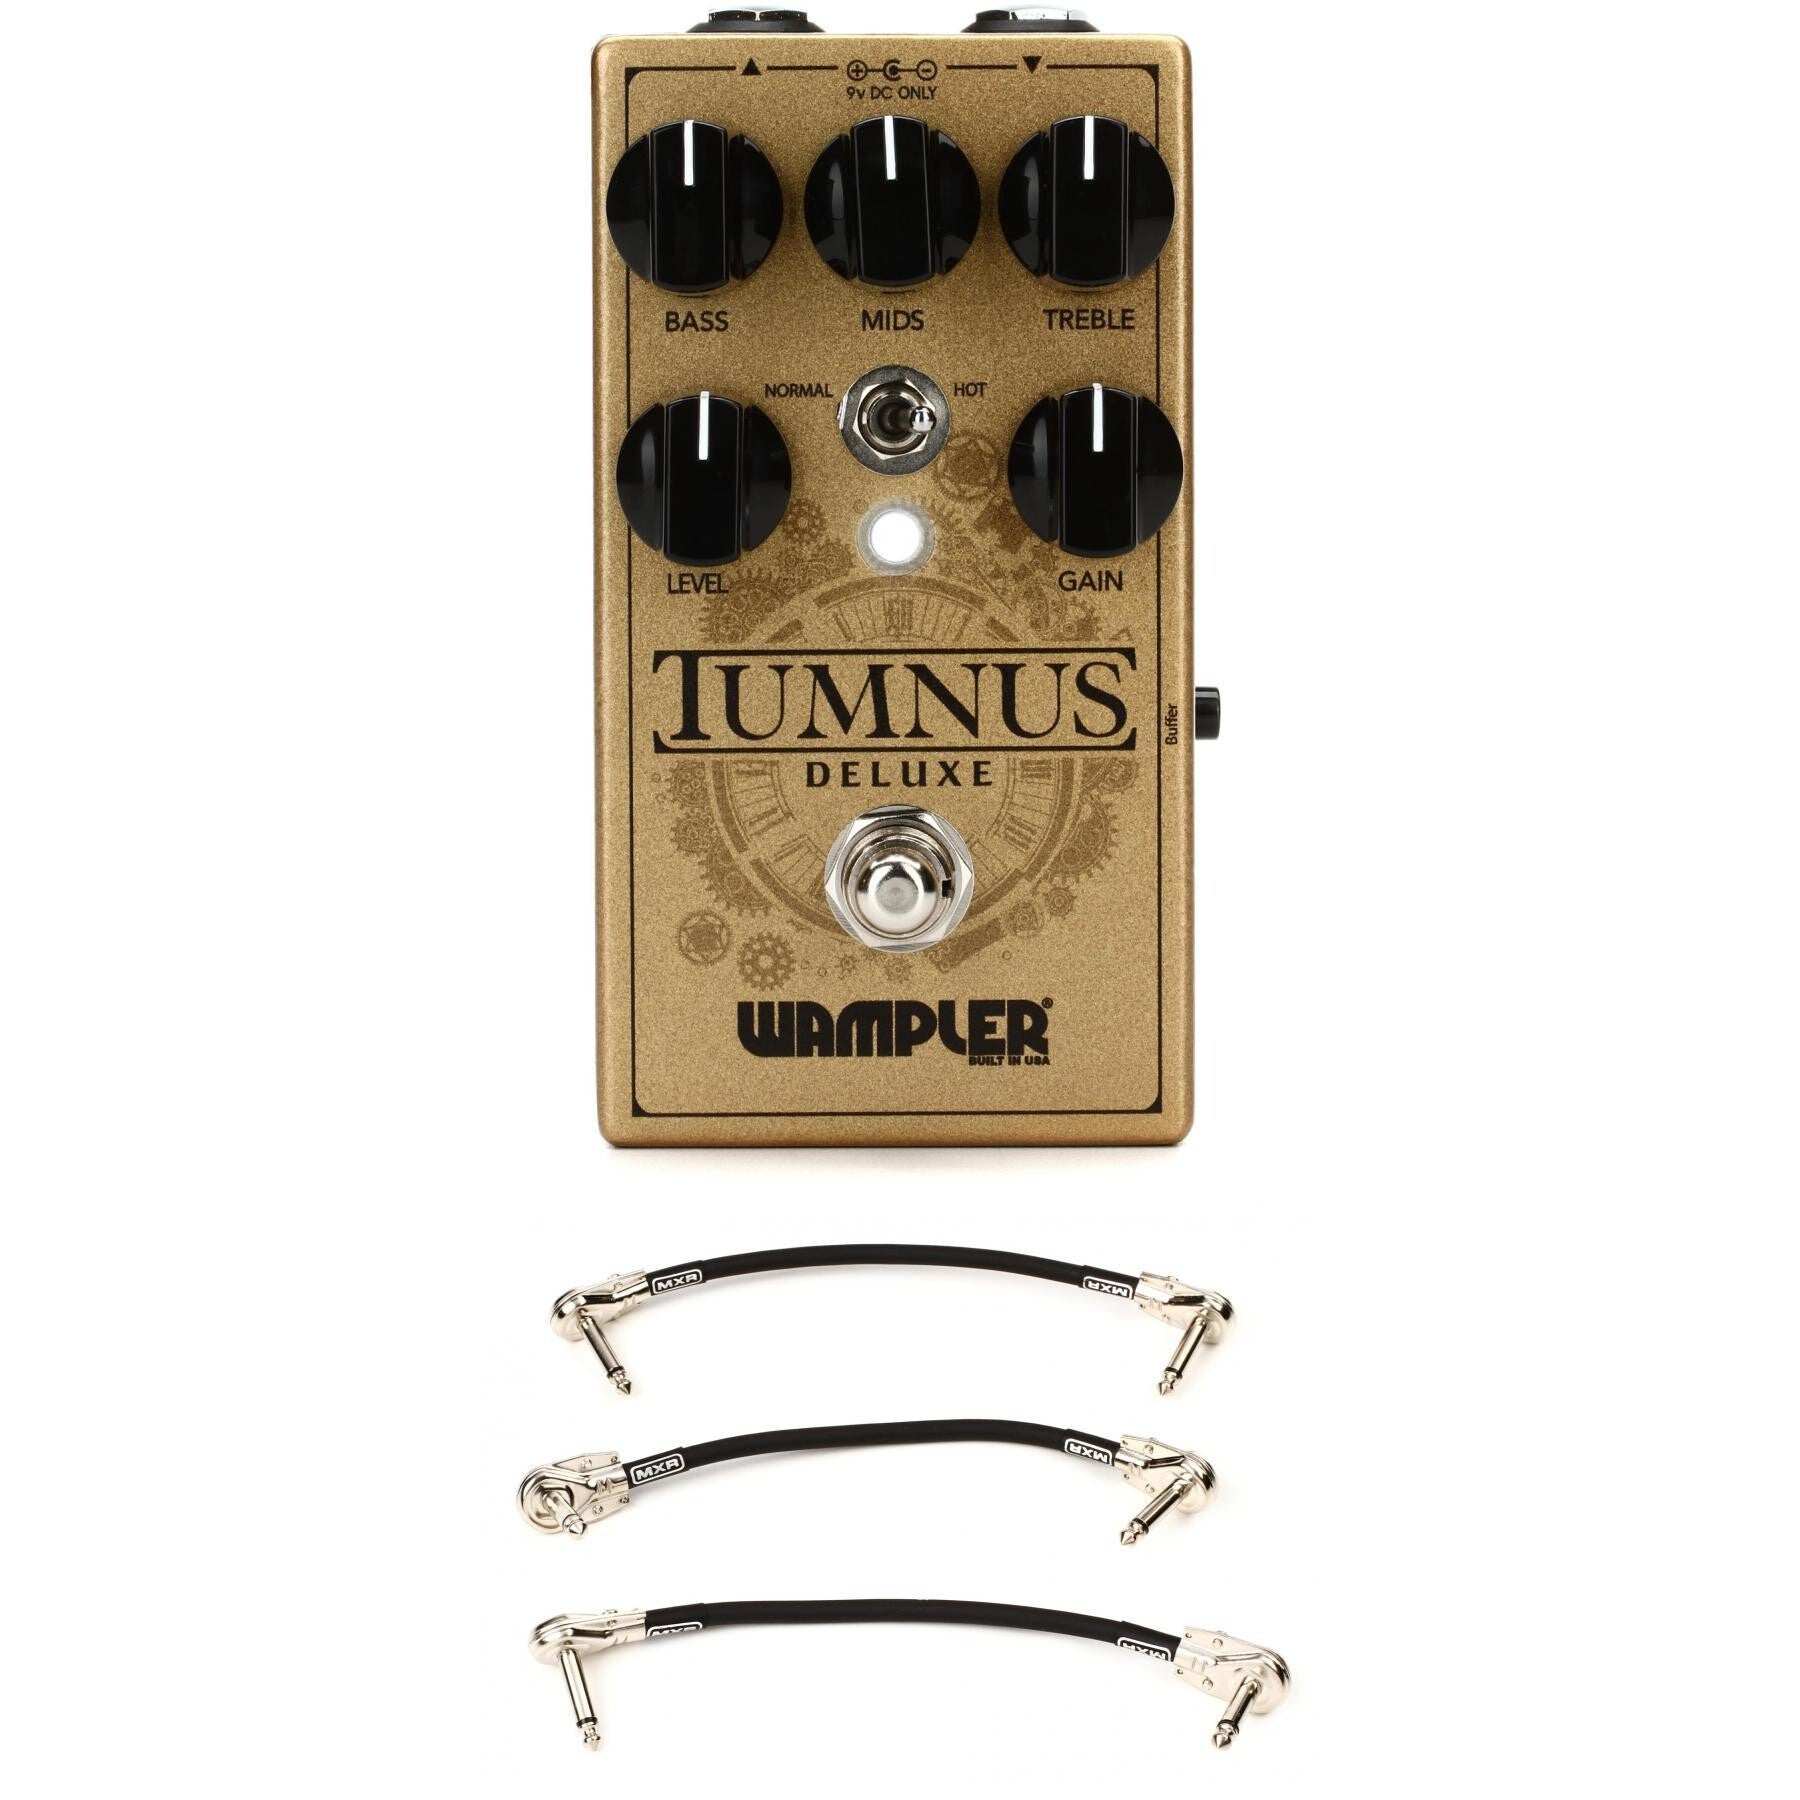 Wampler Tumnus Deluxe Transparent Overdrive Pedal with 3 Patch Cables Bundle